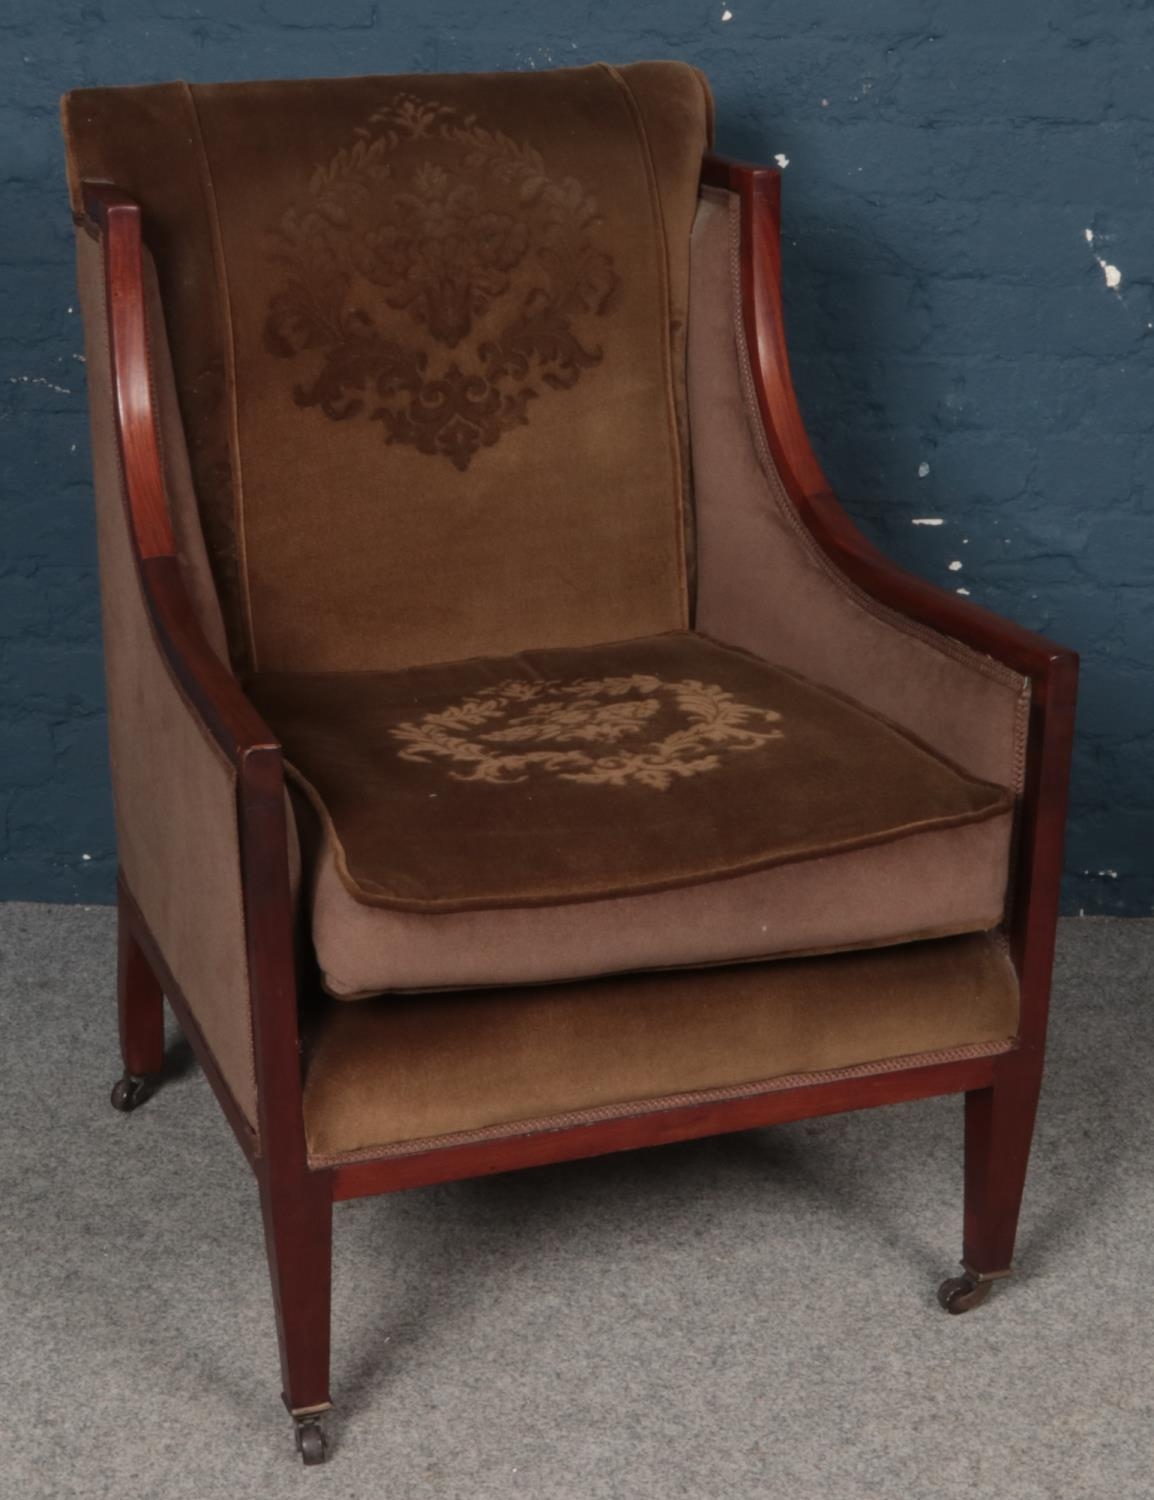 A Mahogany Winged Easy Chair with Fabric Seat and Back.